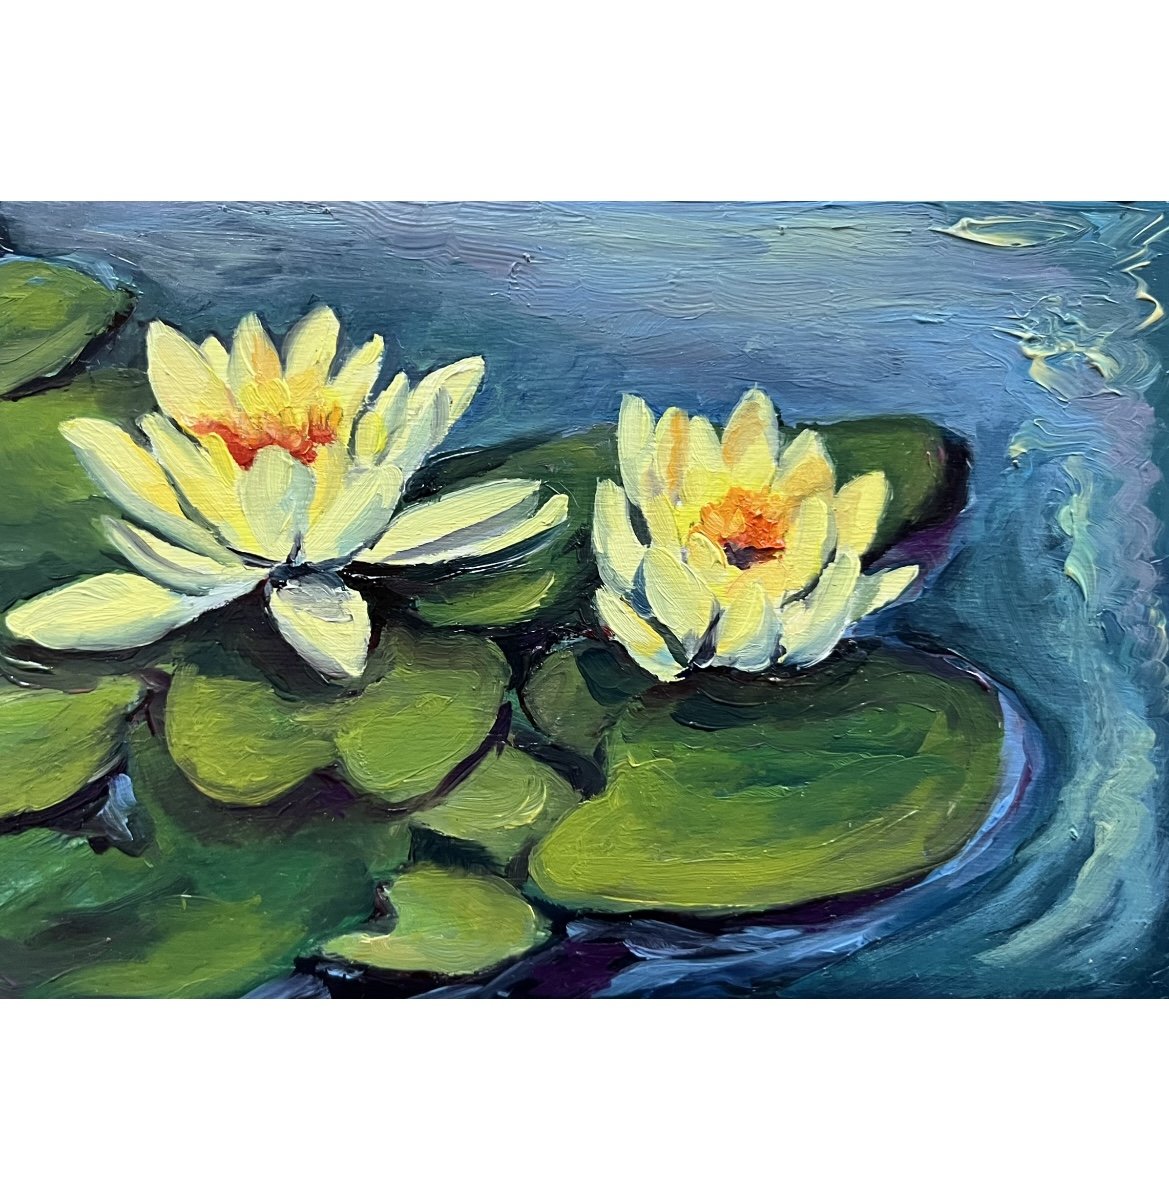 Yellow Water Lilies - 4"x6" - $150